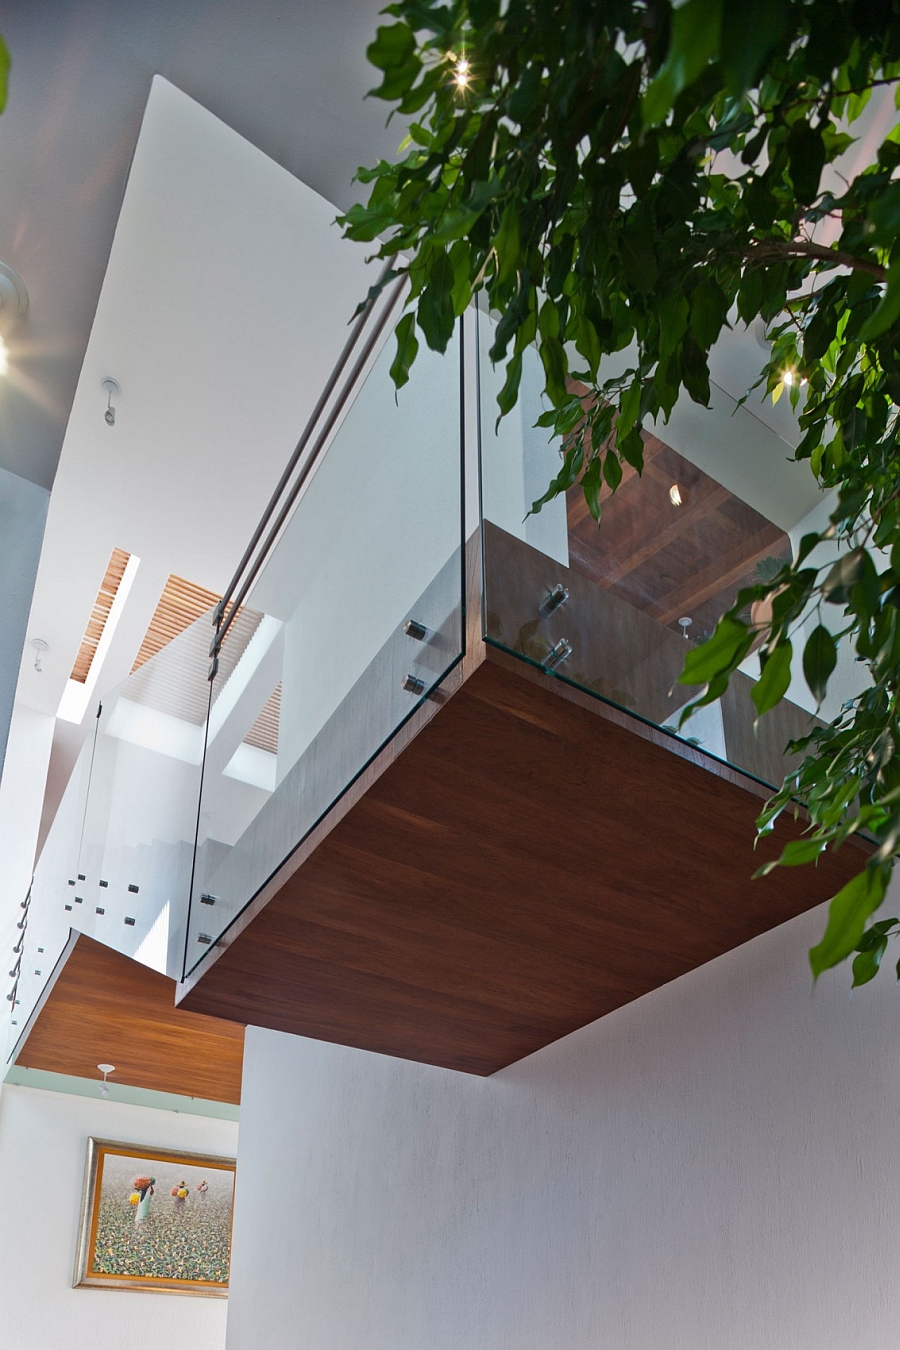 Staircase landing adds to the unique style of the interior